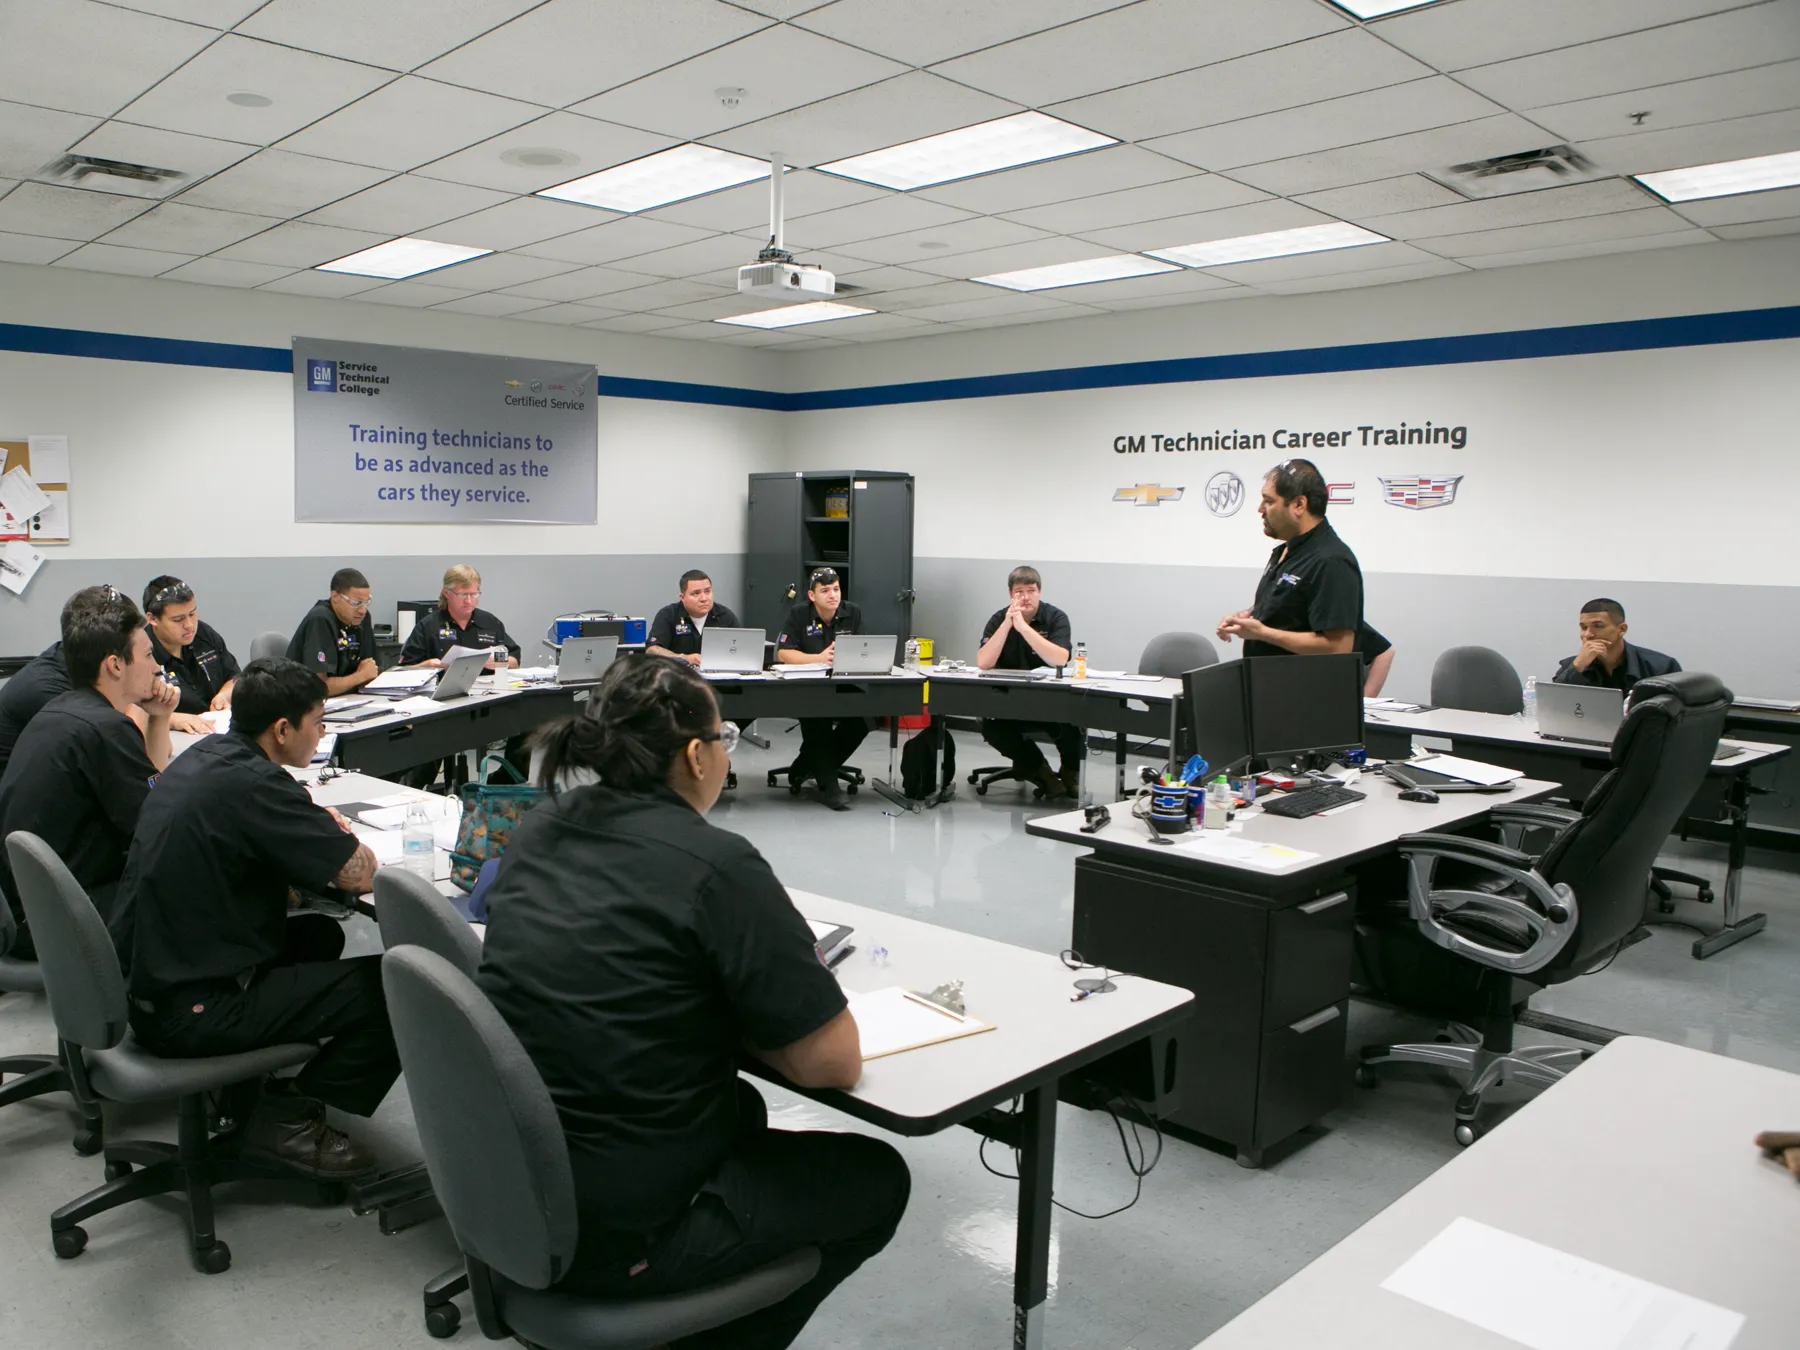 UTI students and Instructor in the GM classroom learning